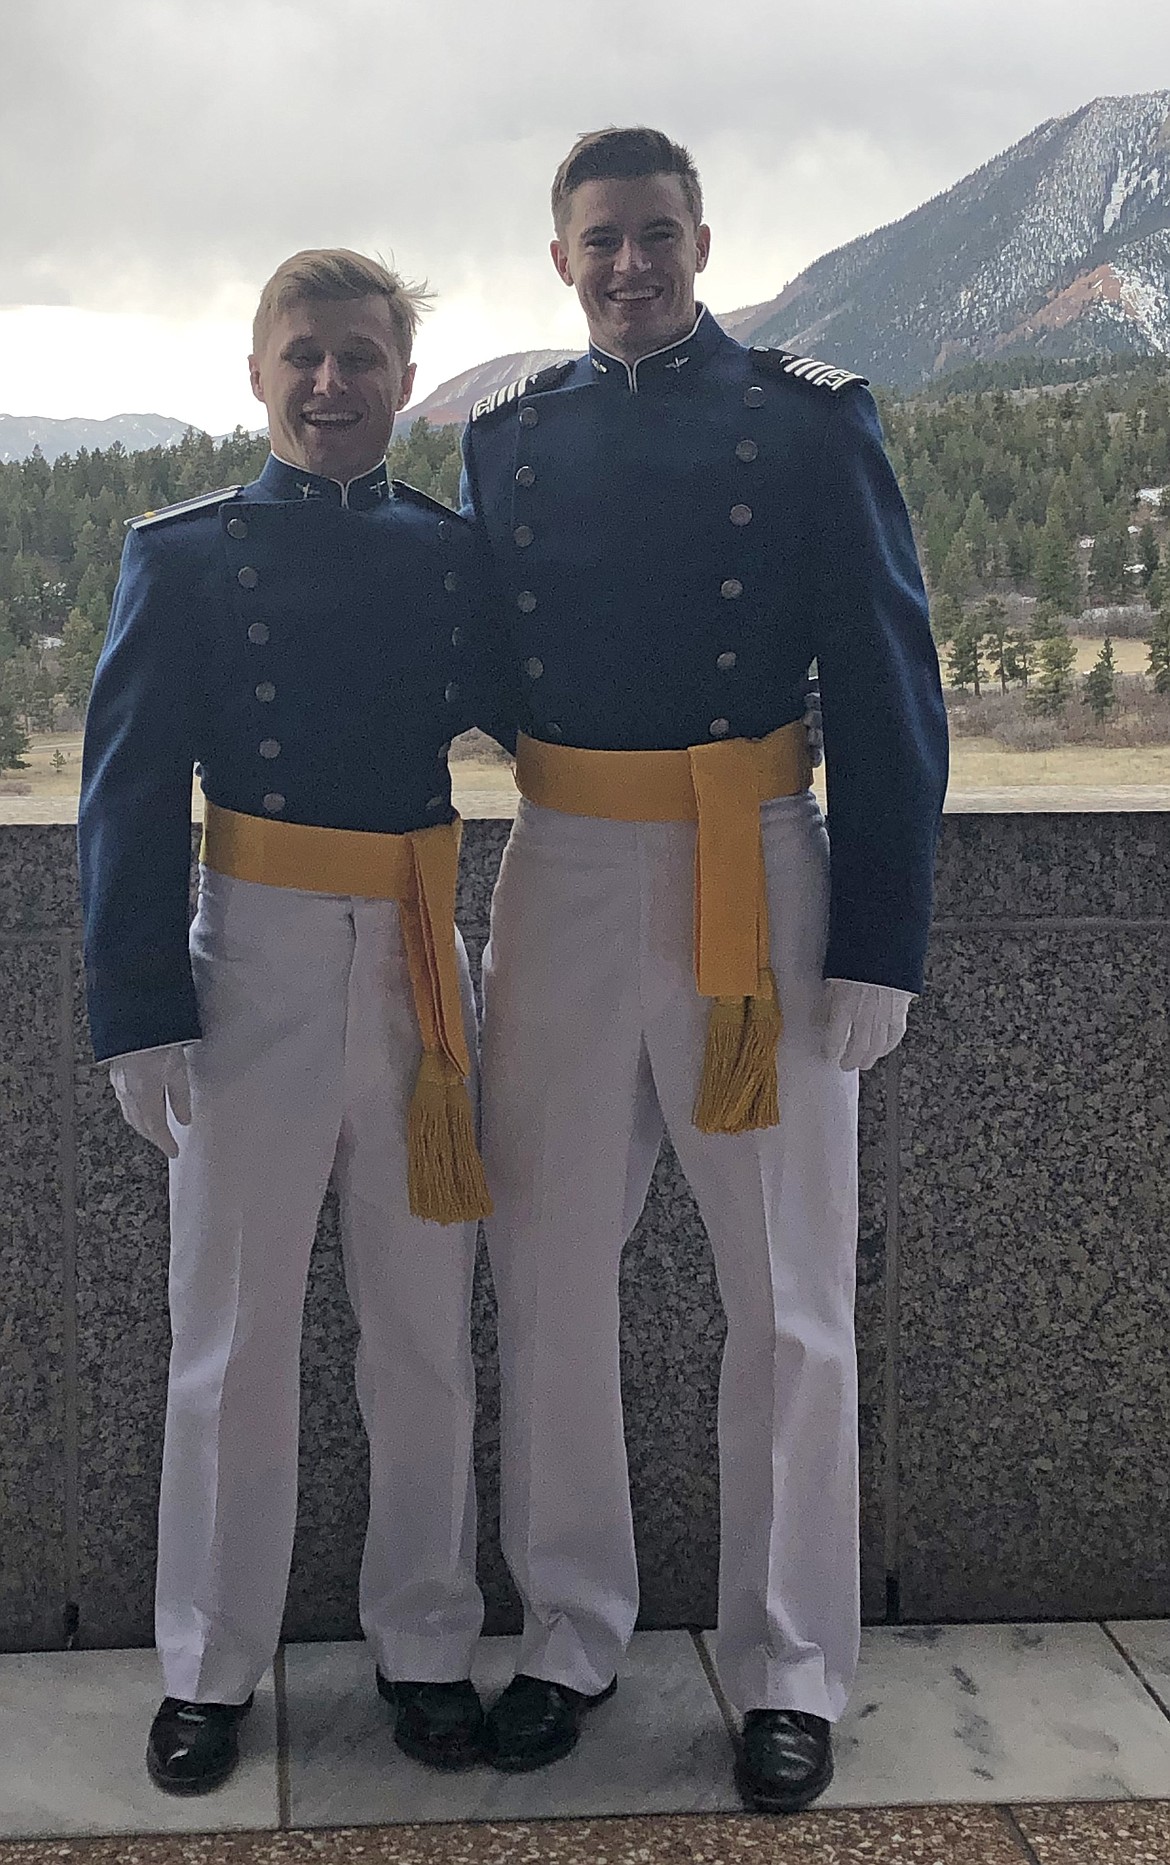 Erich Jaeger, right, snaps a photo with his freshman/sophomore year roommate Koby Hinnant after graduation from the United States Air Force Academy in April. Jaeger is a 2014 Coeur d'Alene High School graduate. (Courtesy photo)